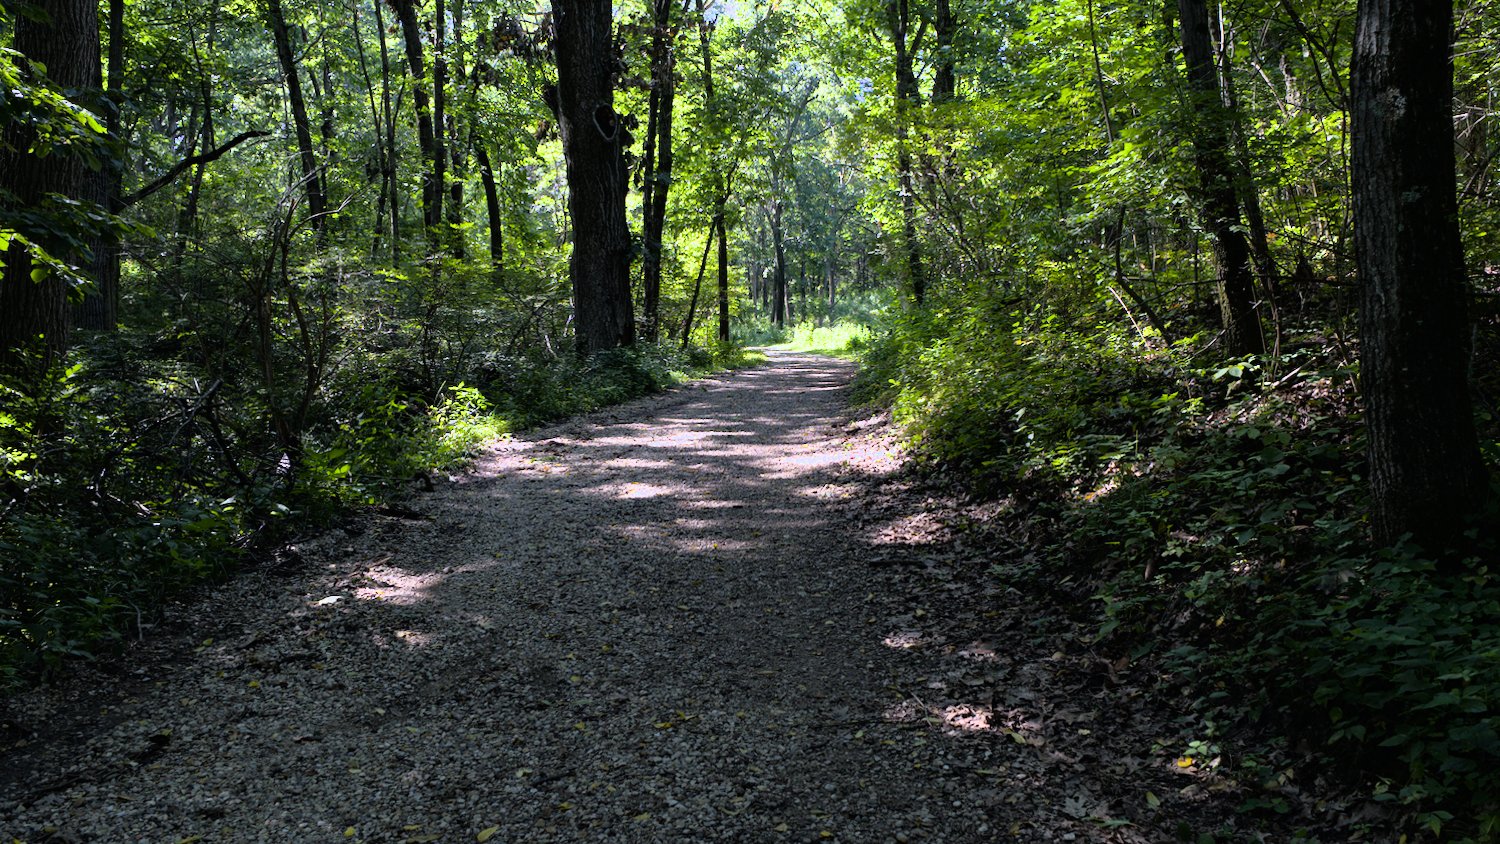 Part of the Veteran Acres - Sterne's Woods Trail.